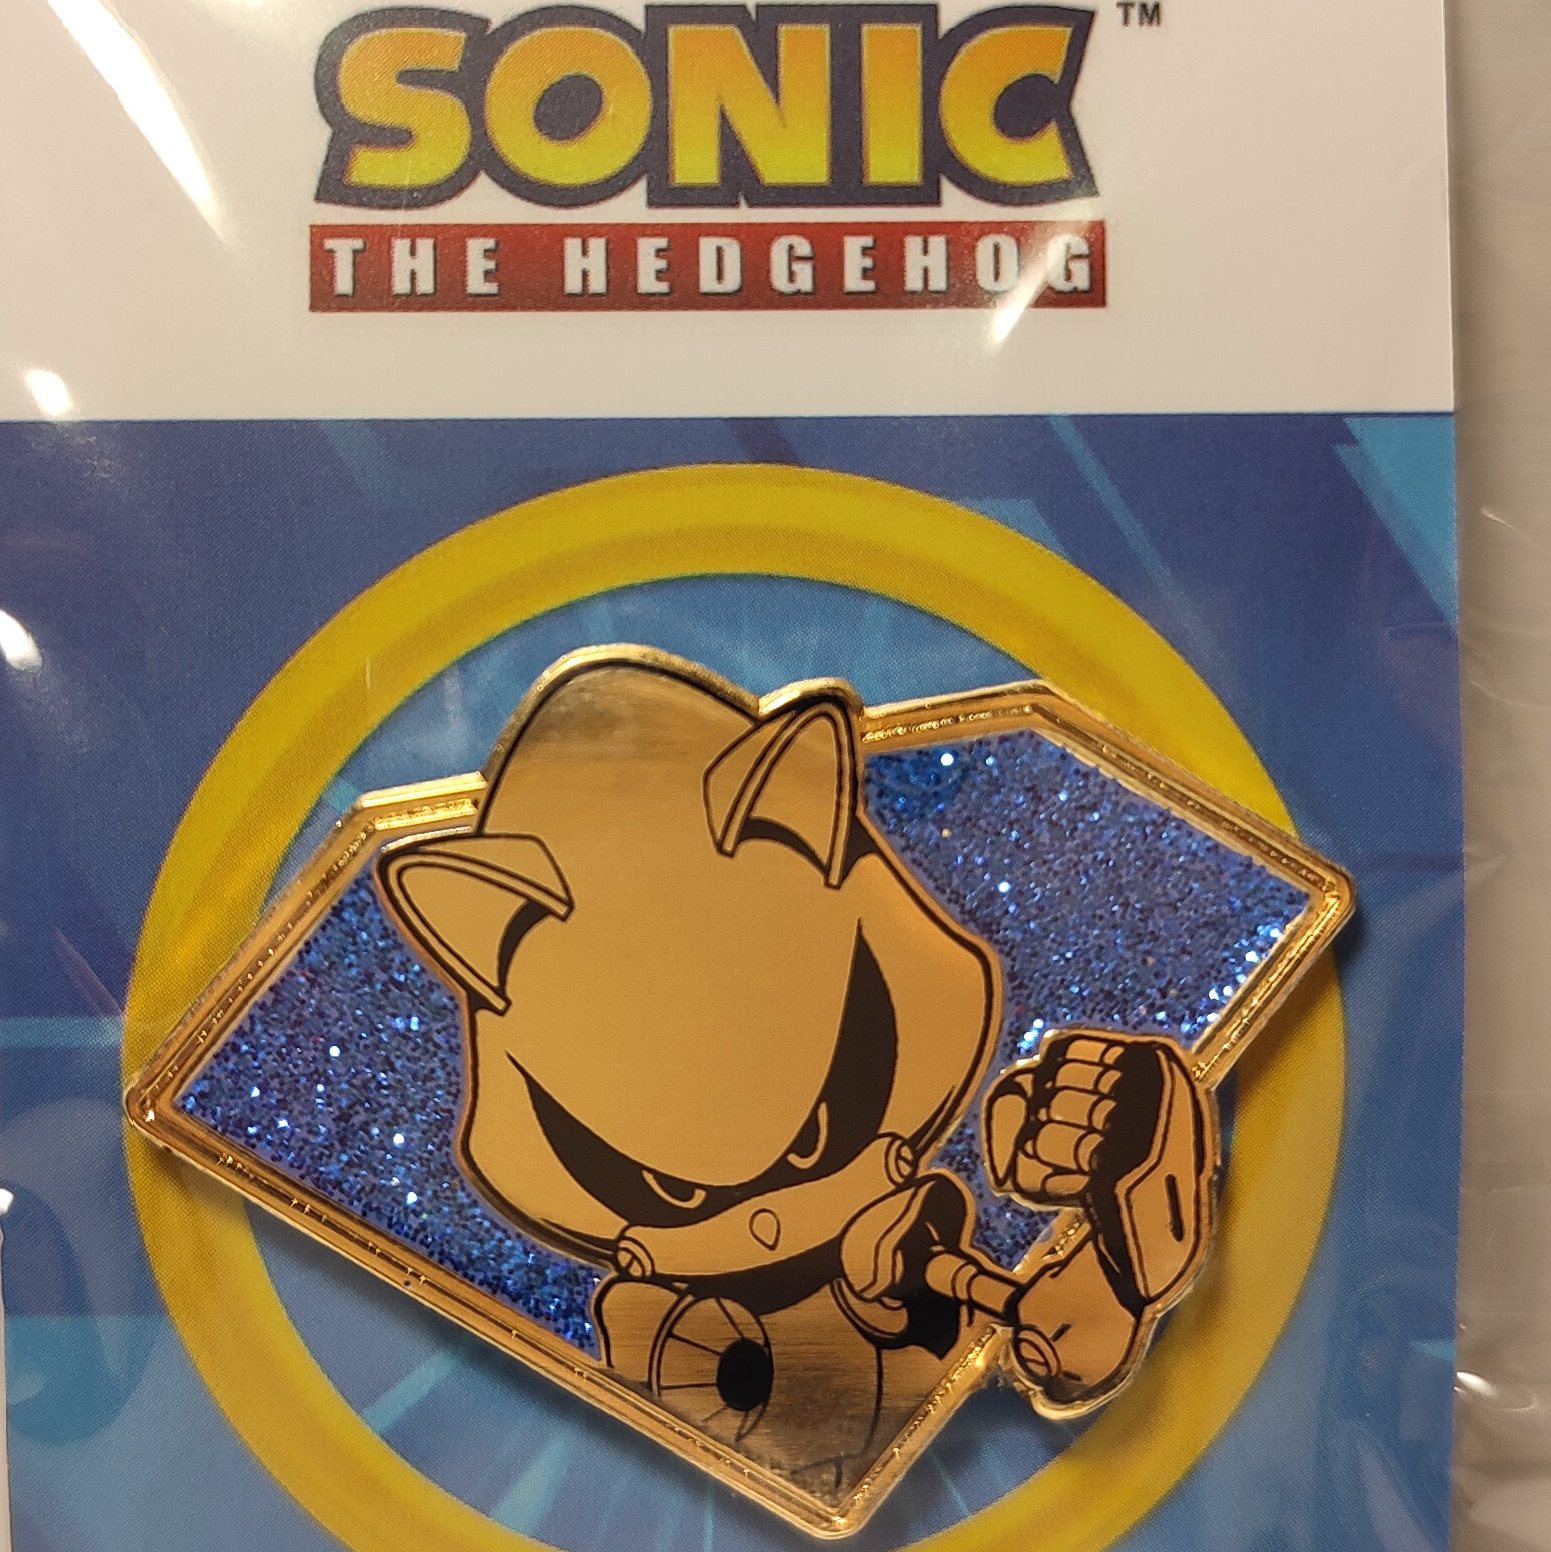 Primary image for Sonic the Hedgehog Metal Sonic Enamel Pin Official Sega Collectible Badge